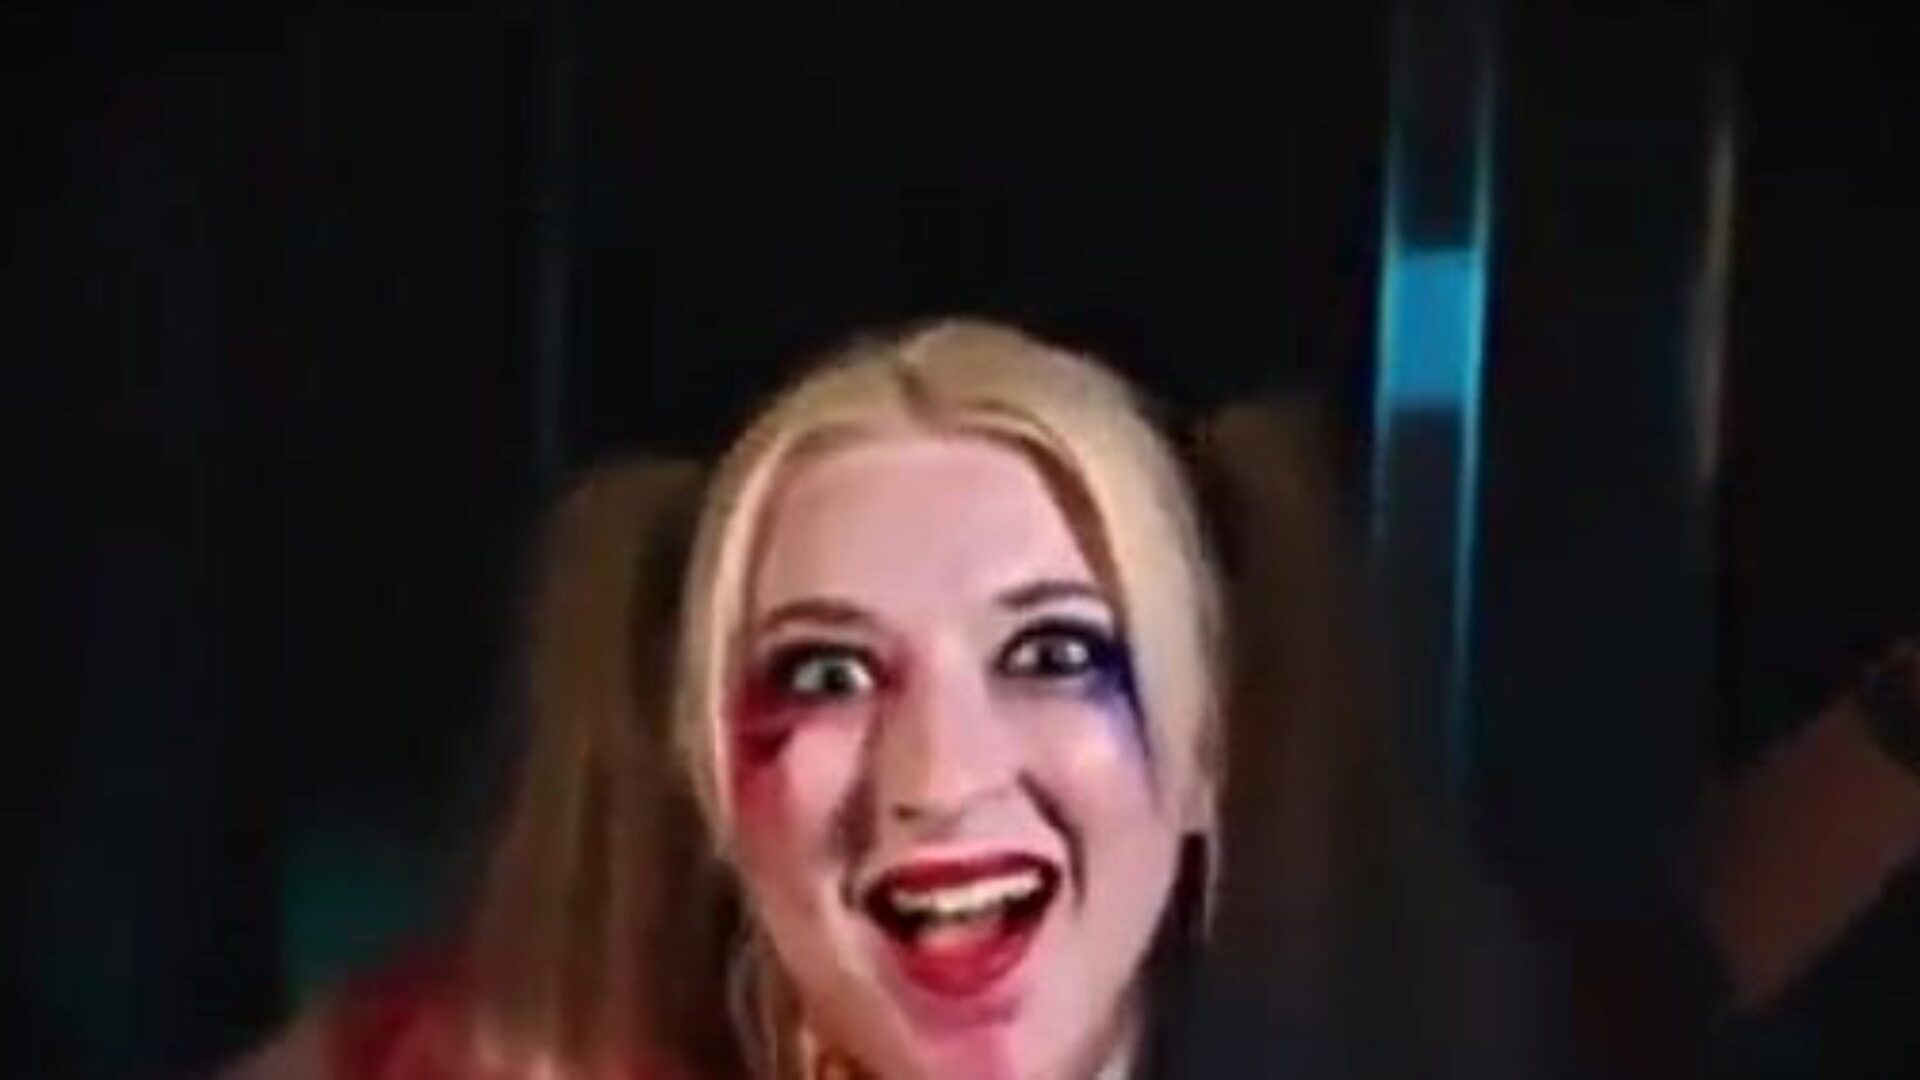 Suicide Squad Harley Quinn Parody (by:Brazzers)in the link http://adf.ly/1lqcZt